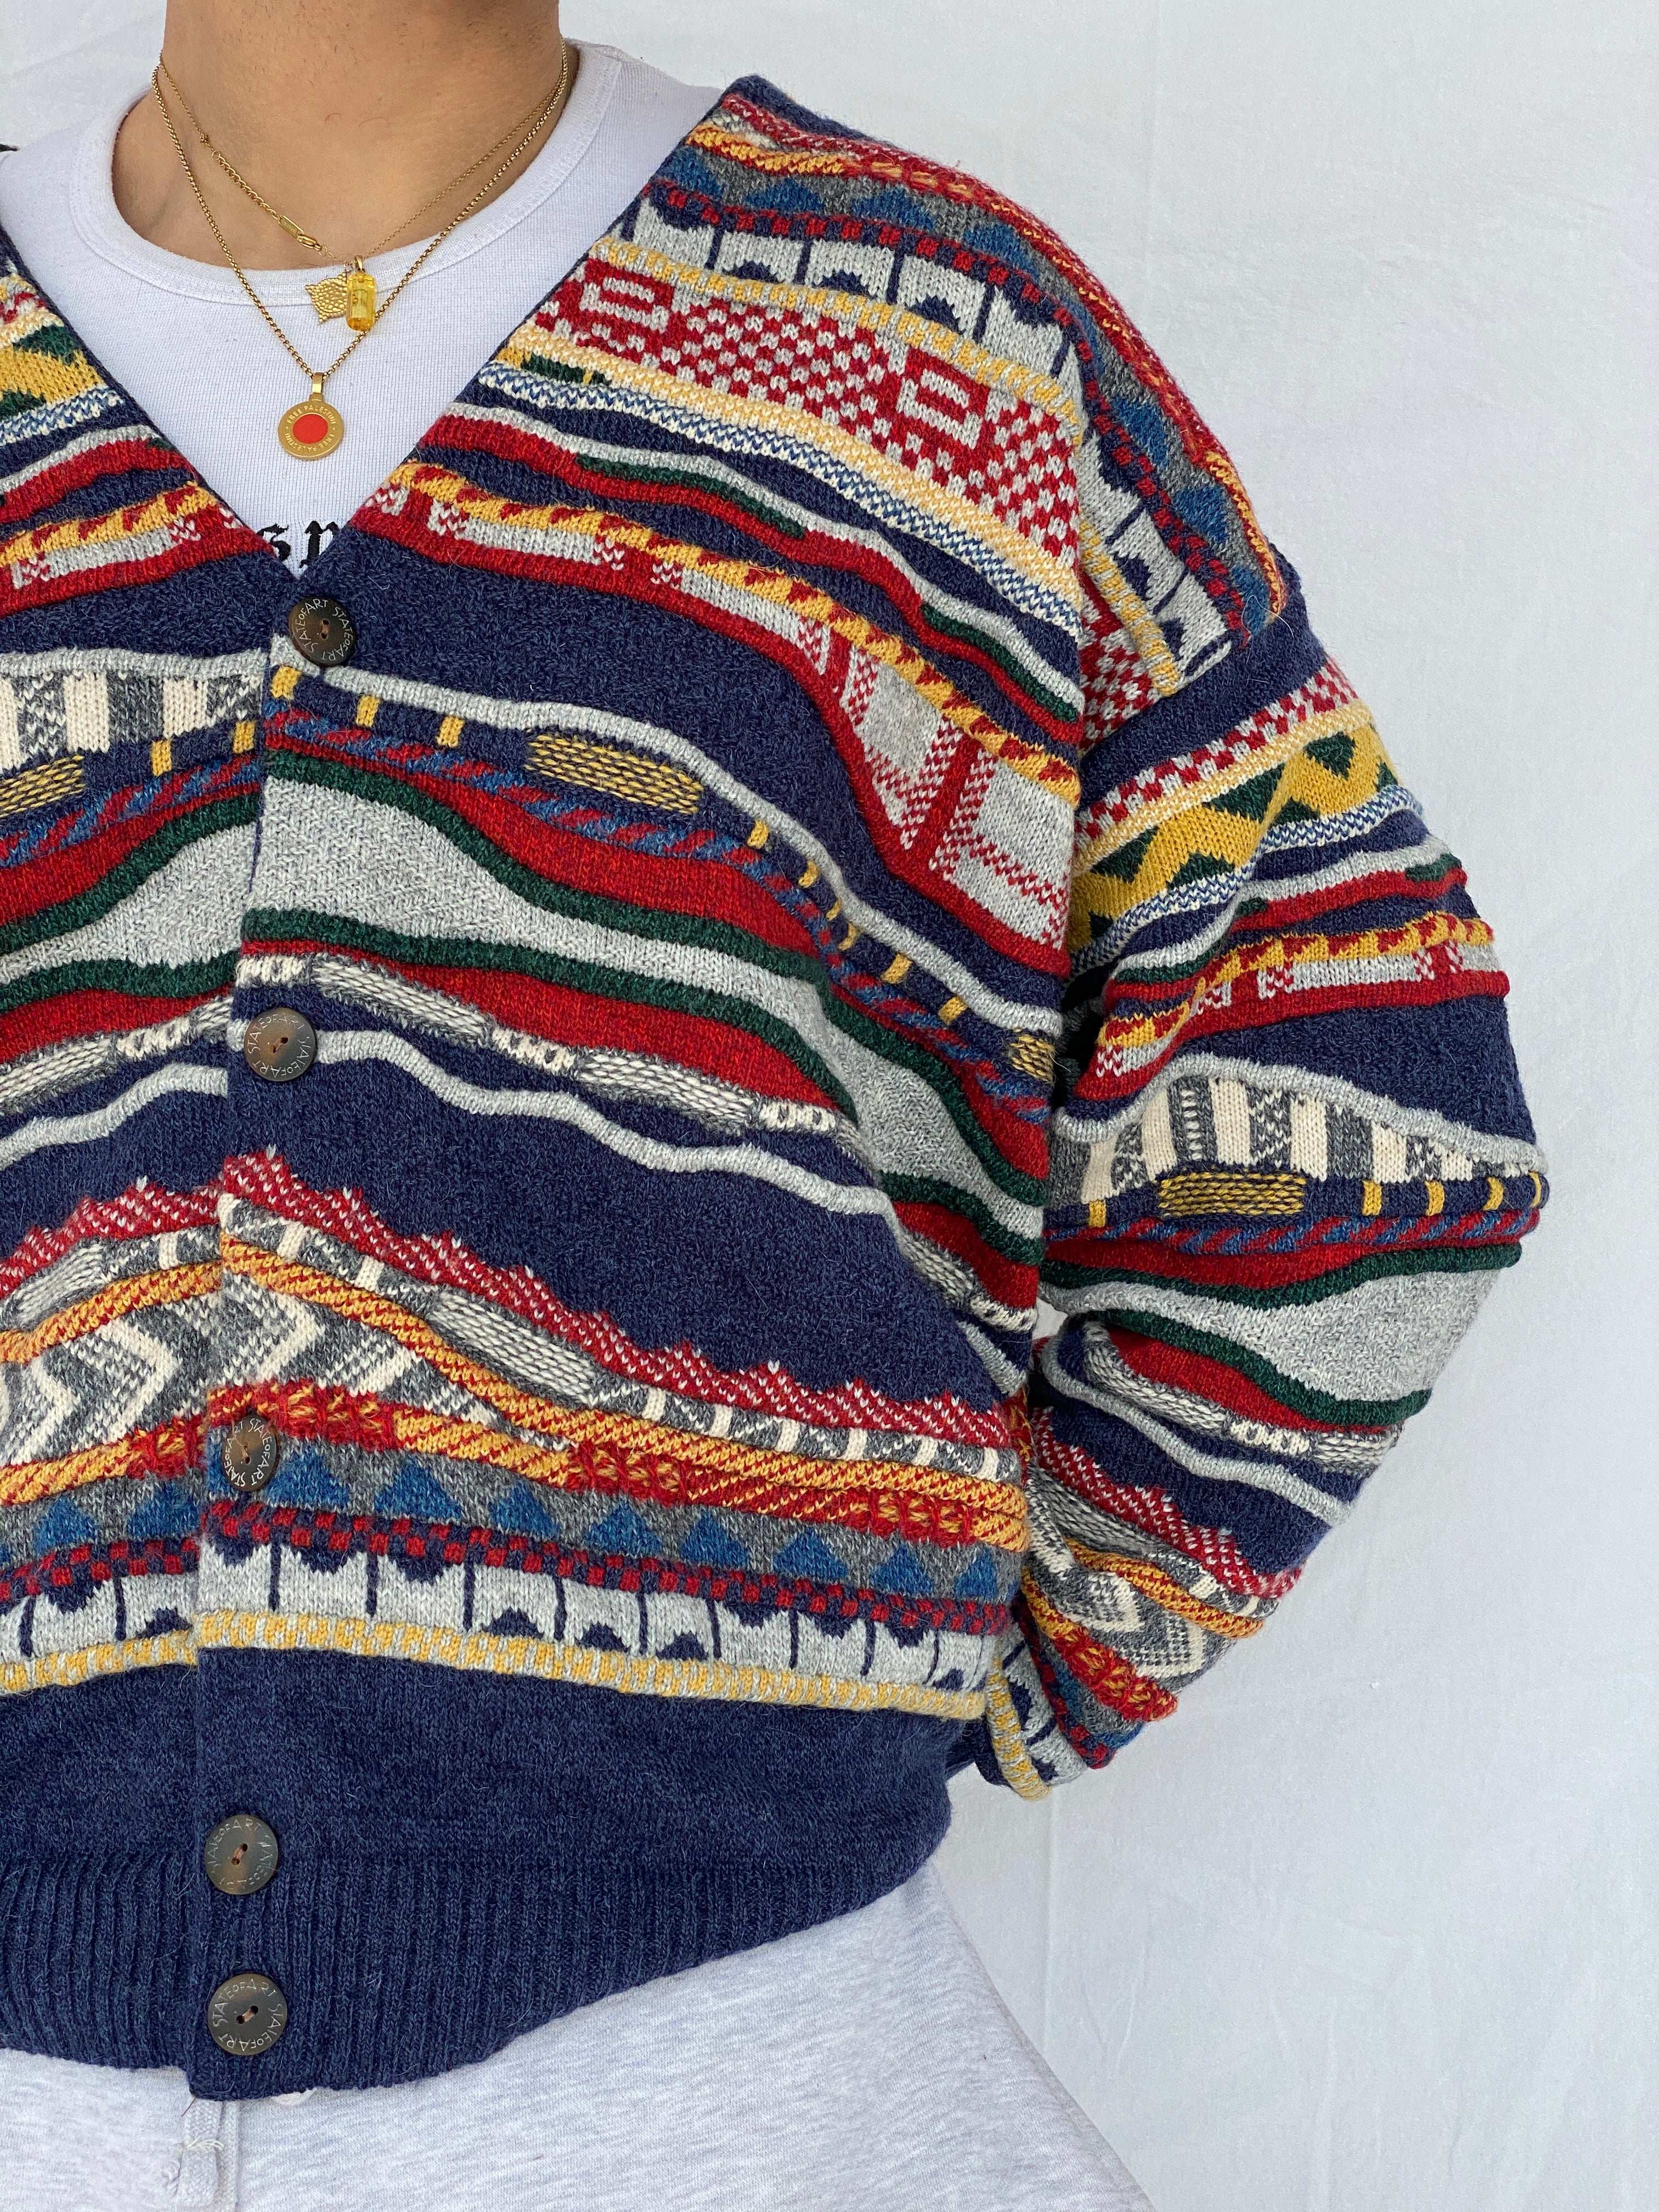 Vintage State of Art Coogi-Style Knitted Multi-Colored Cardigan Sweater - Size XL - Balagan Vintage Cardigan 90s, Abdullah, cardigan, knitted cardigan, knitted sweater, oversized sweater, vintage sweater, winter